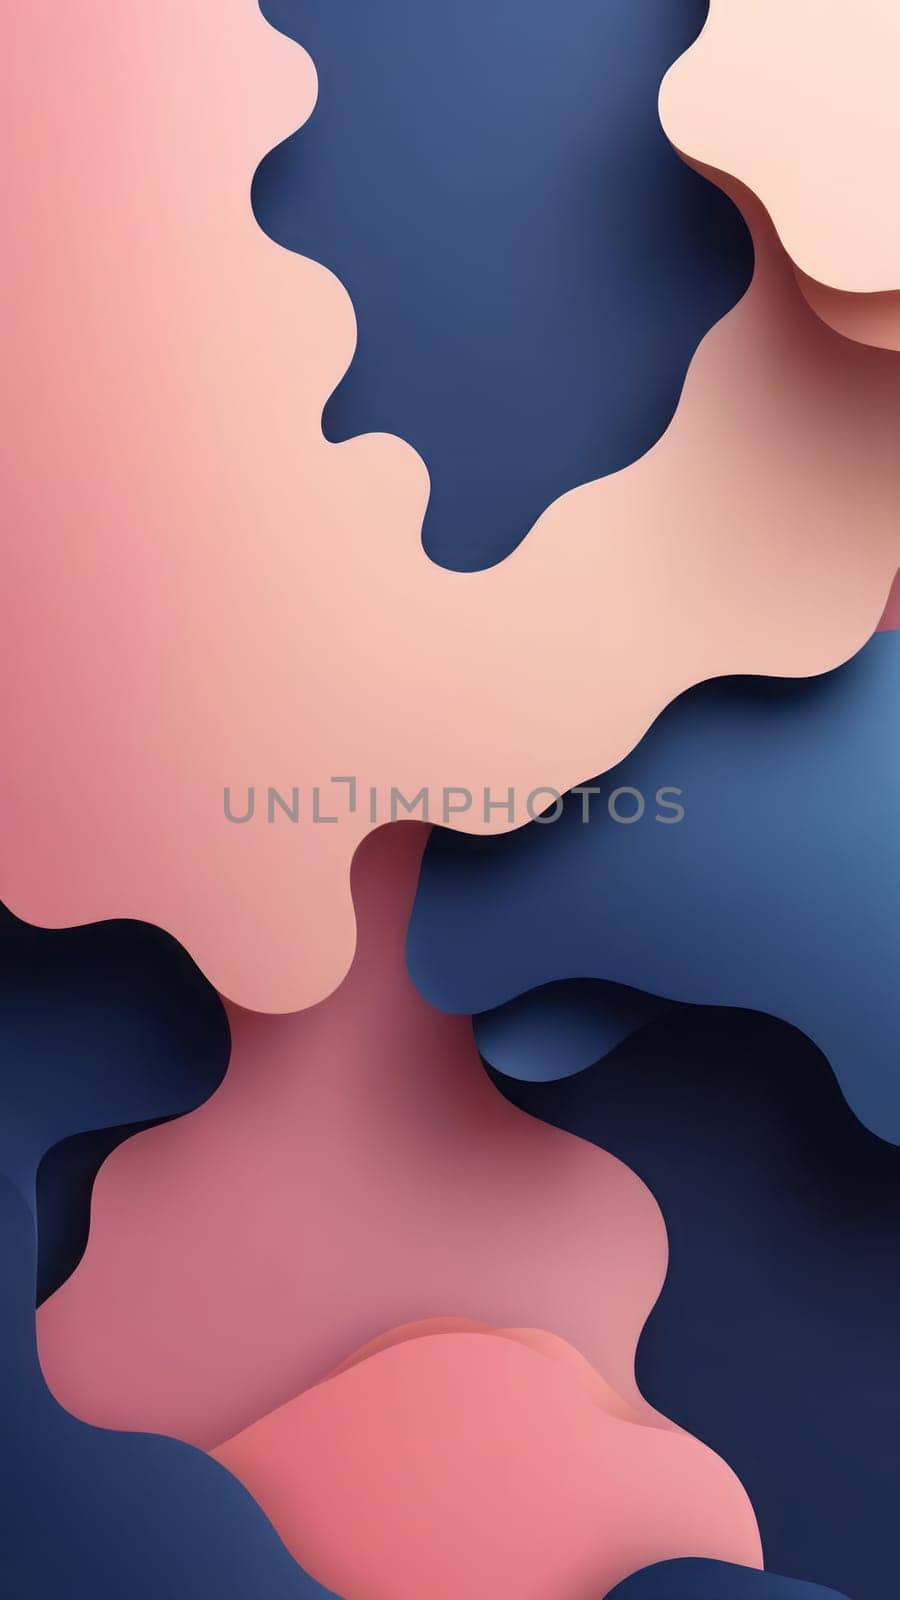 Creativity in paints from Irregular shapes and navy by nkotlyar